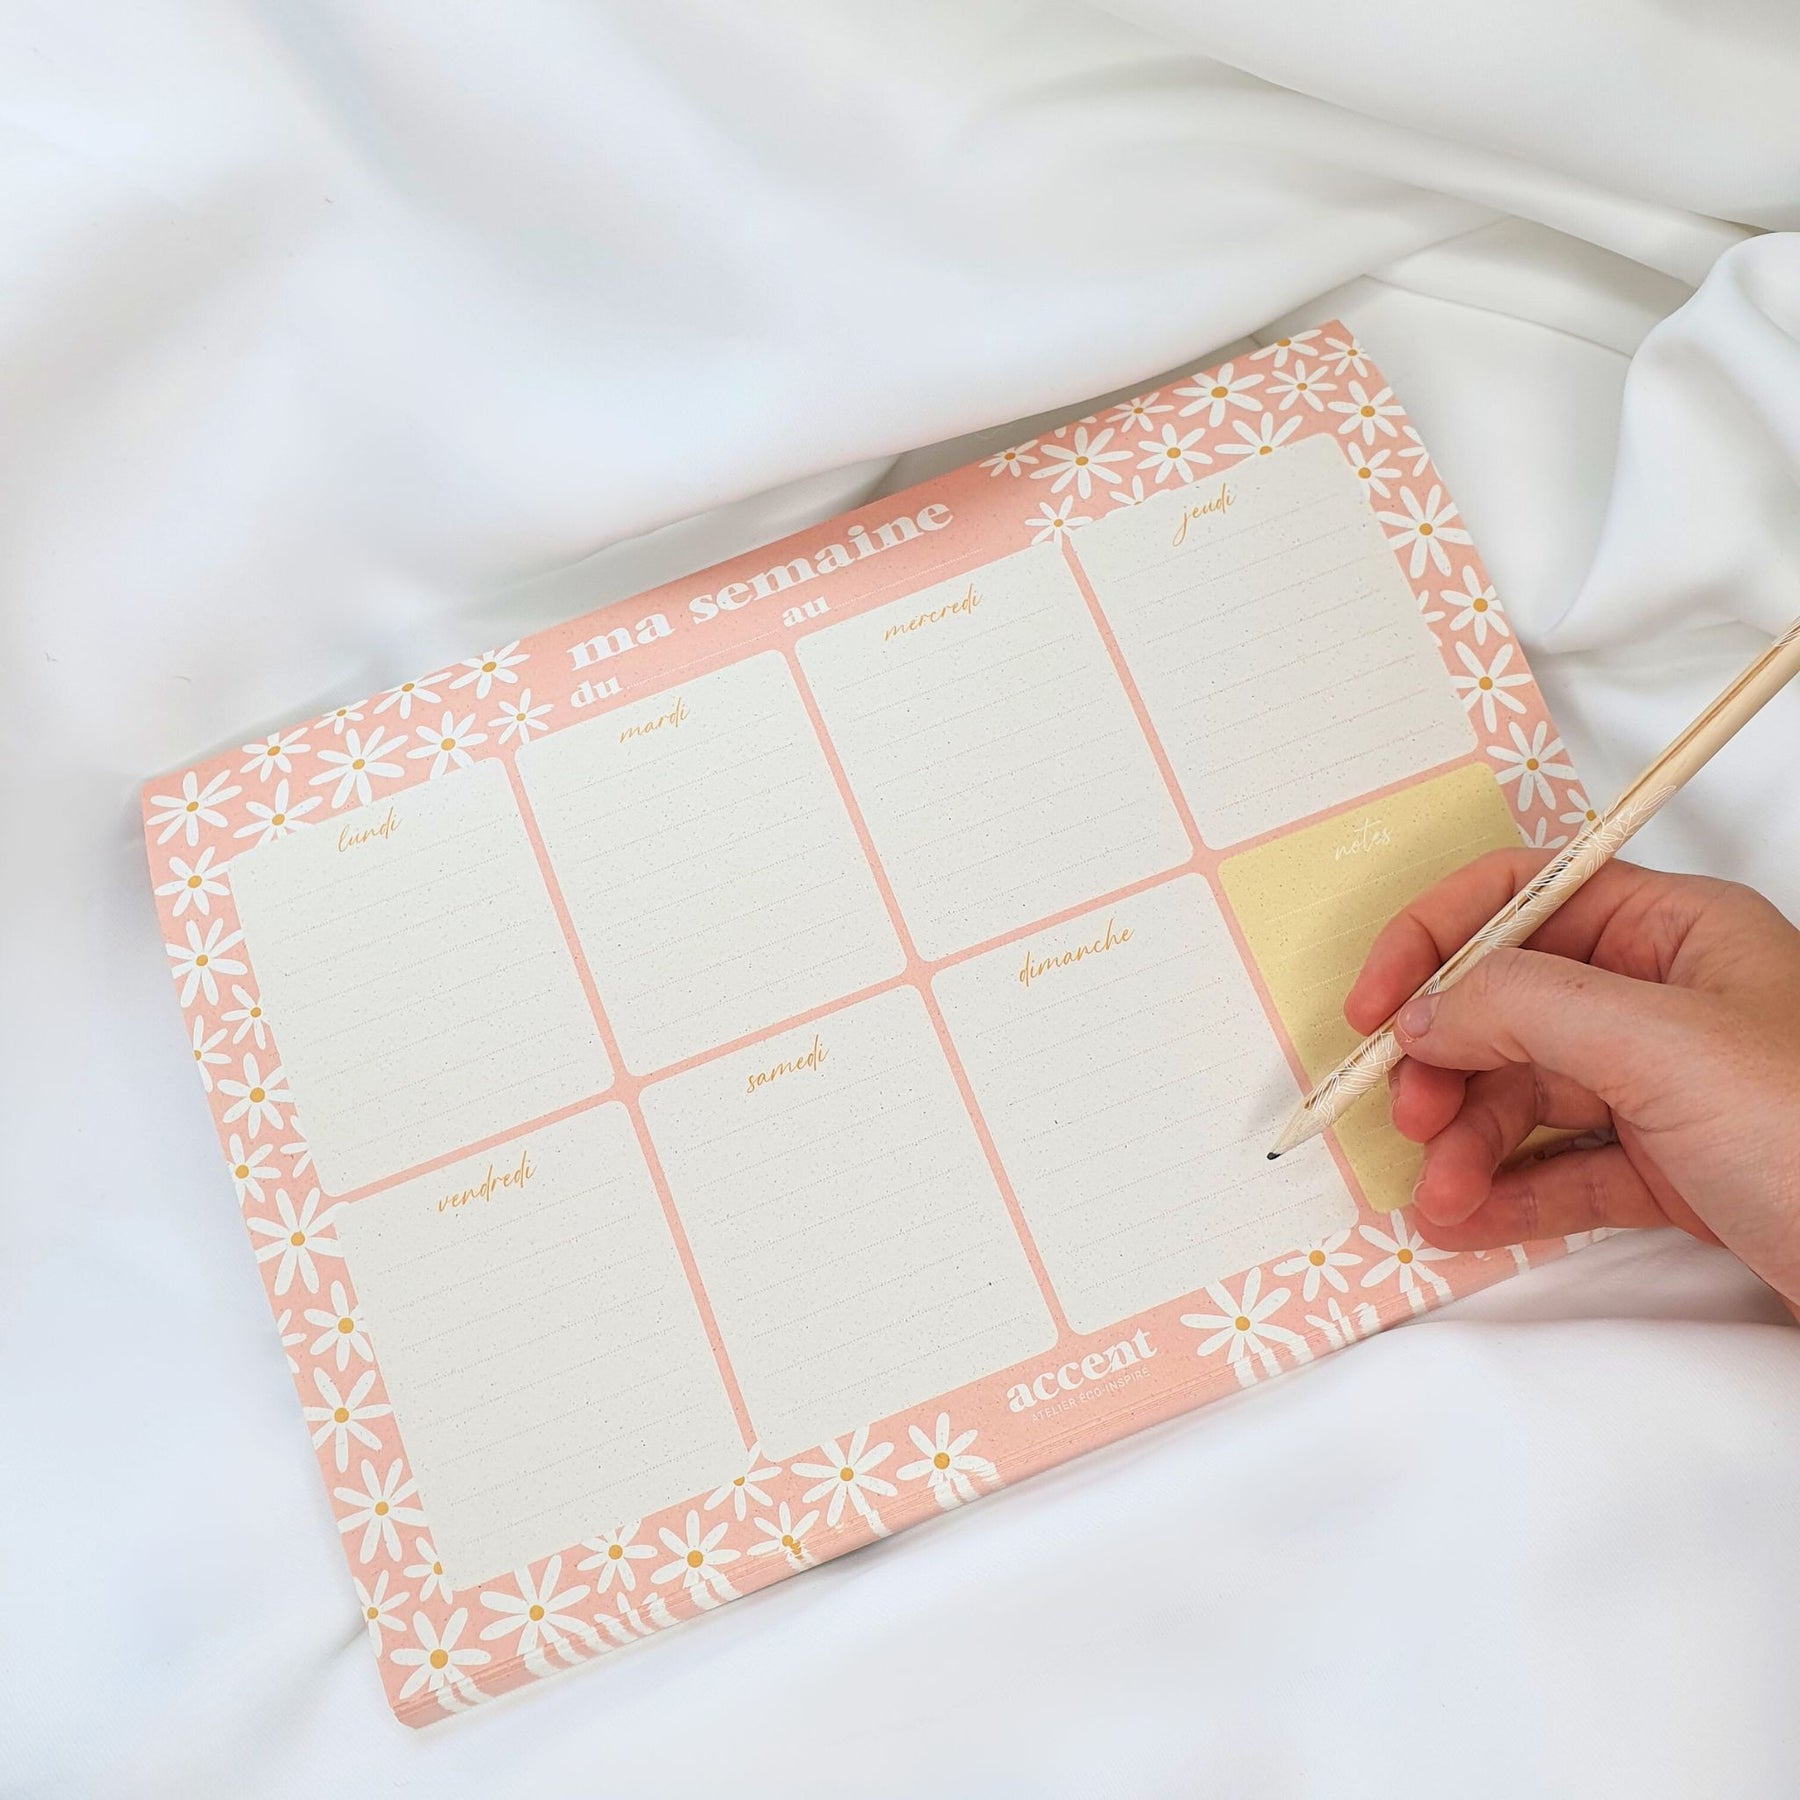 Weekly planner A4 – The time of flowers